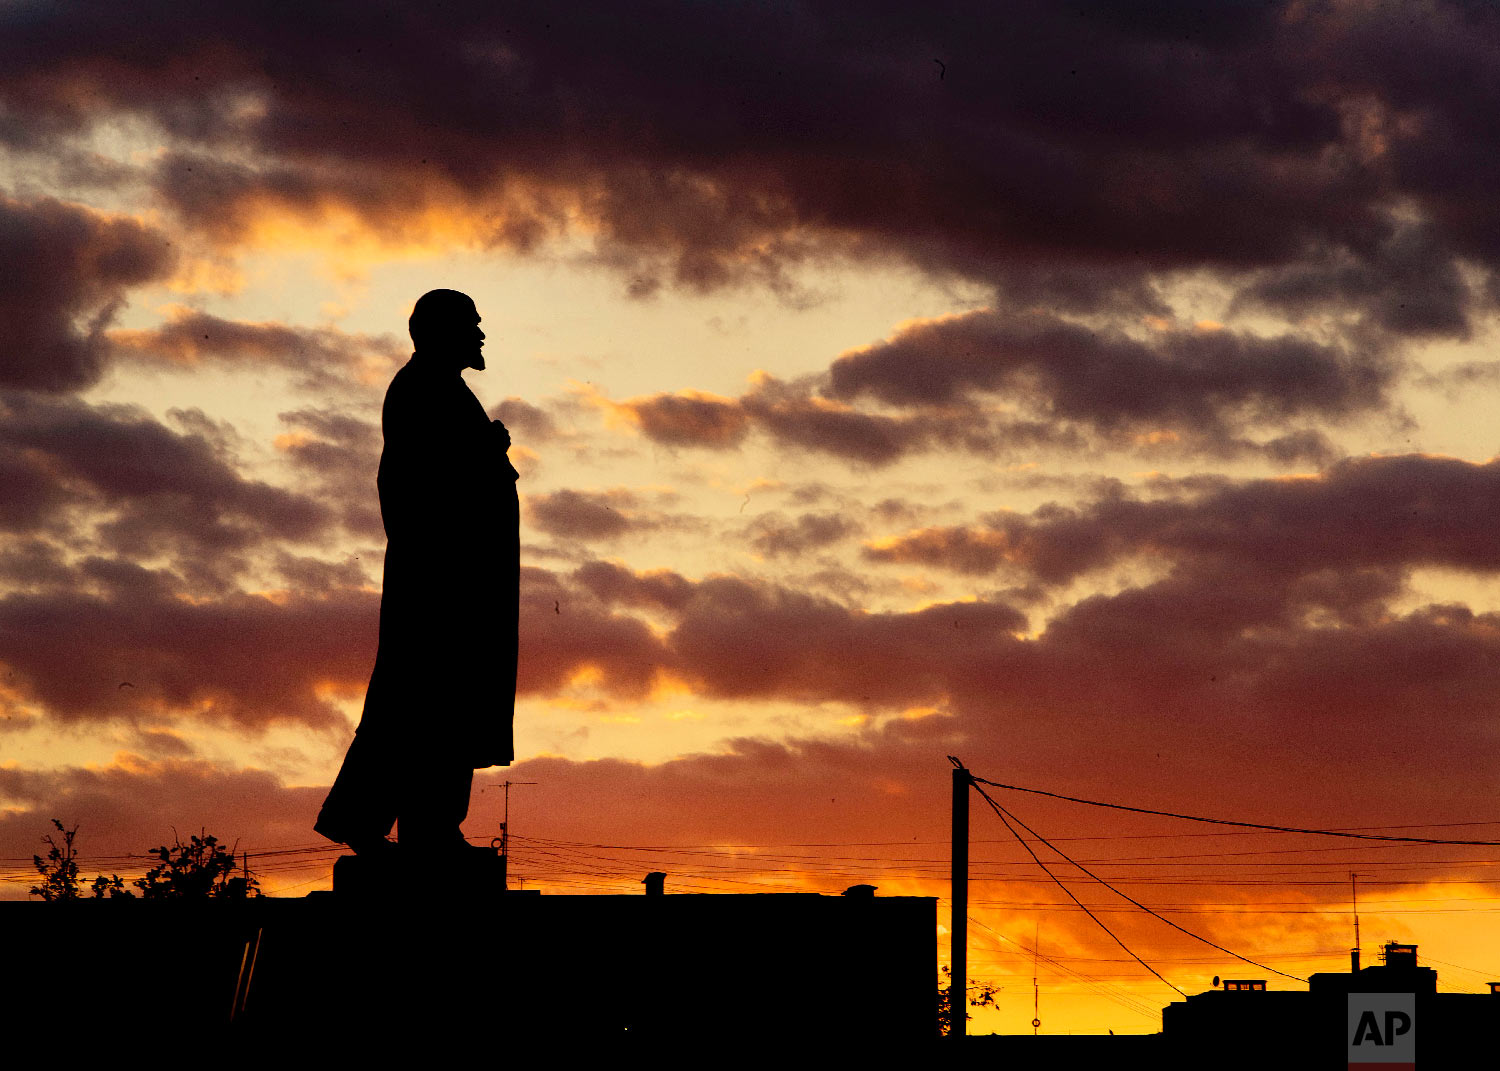  A Lenin statue stands on a column as the sun sets during the 2018 soccer World Cup in Podolsk near Moscow, Russia on June 21, 2018. (AP Photo/Michael Probst) 